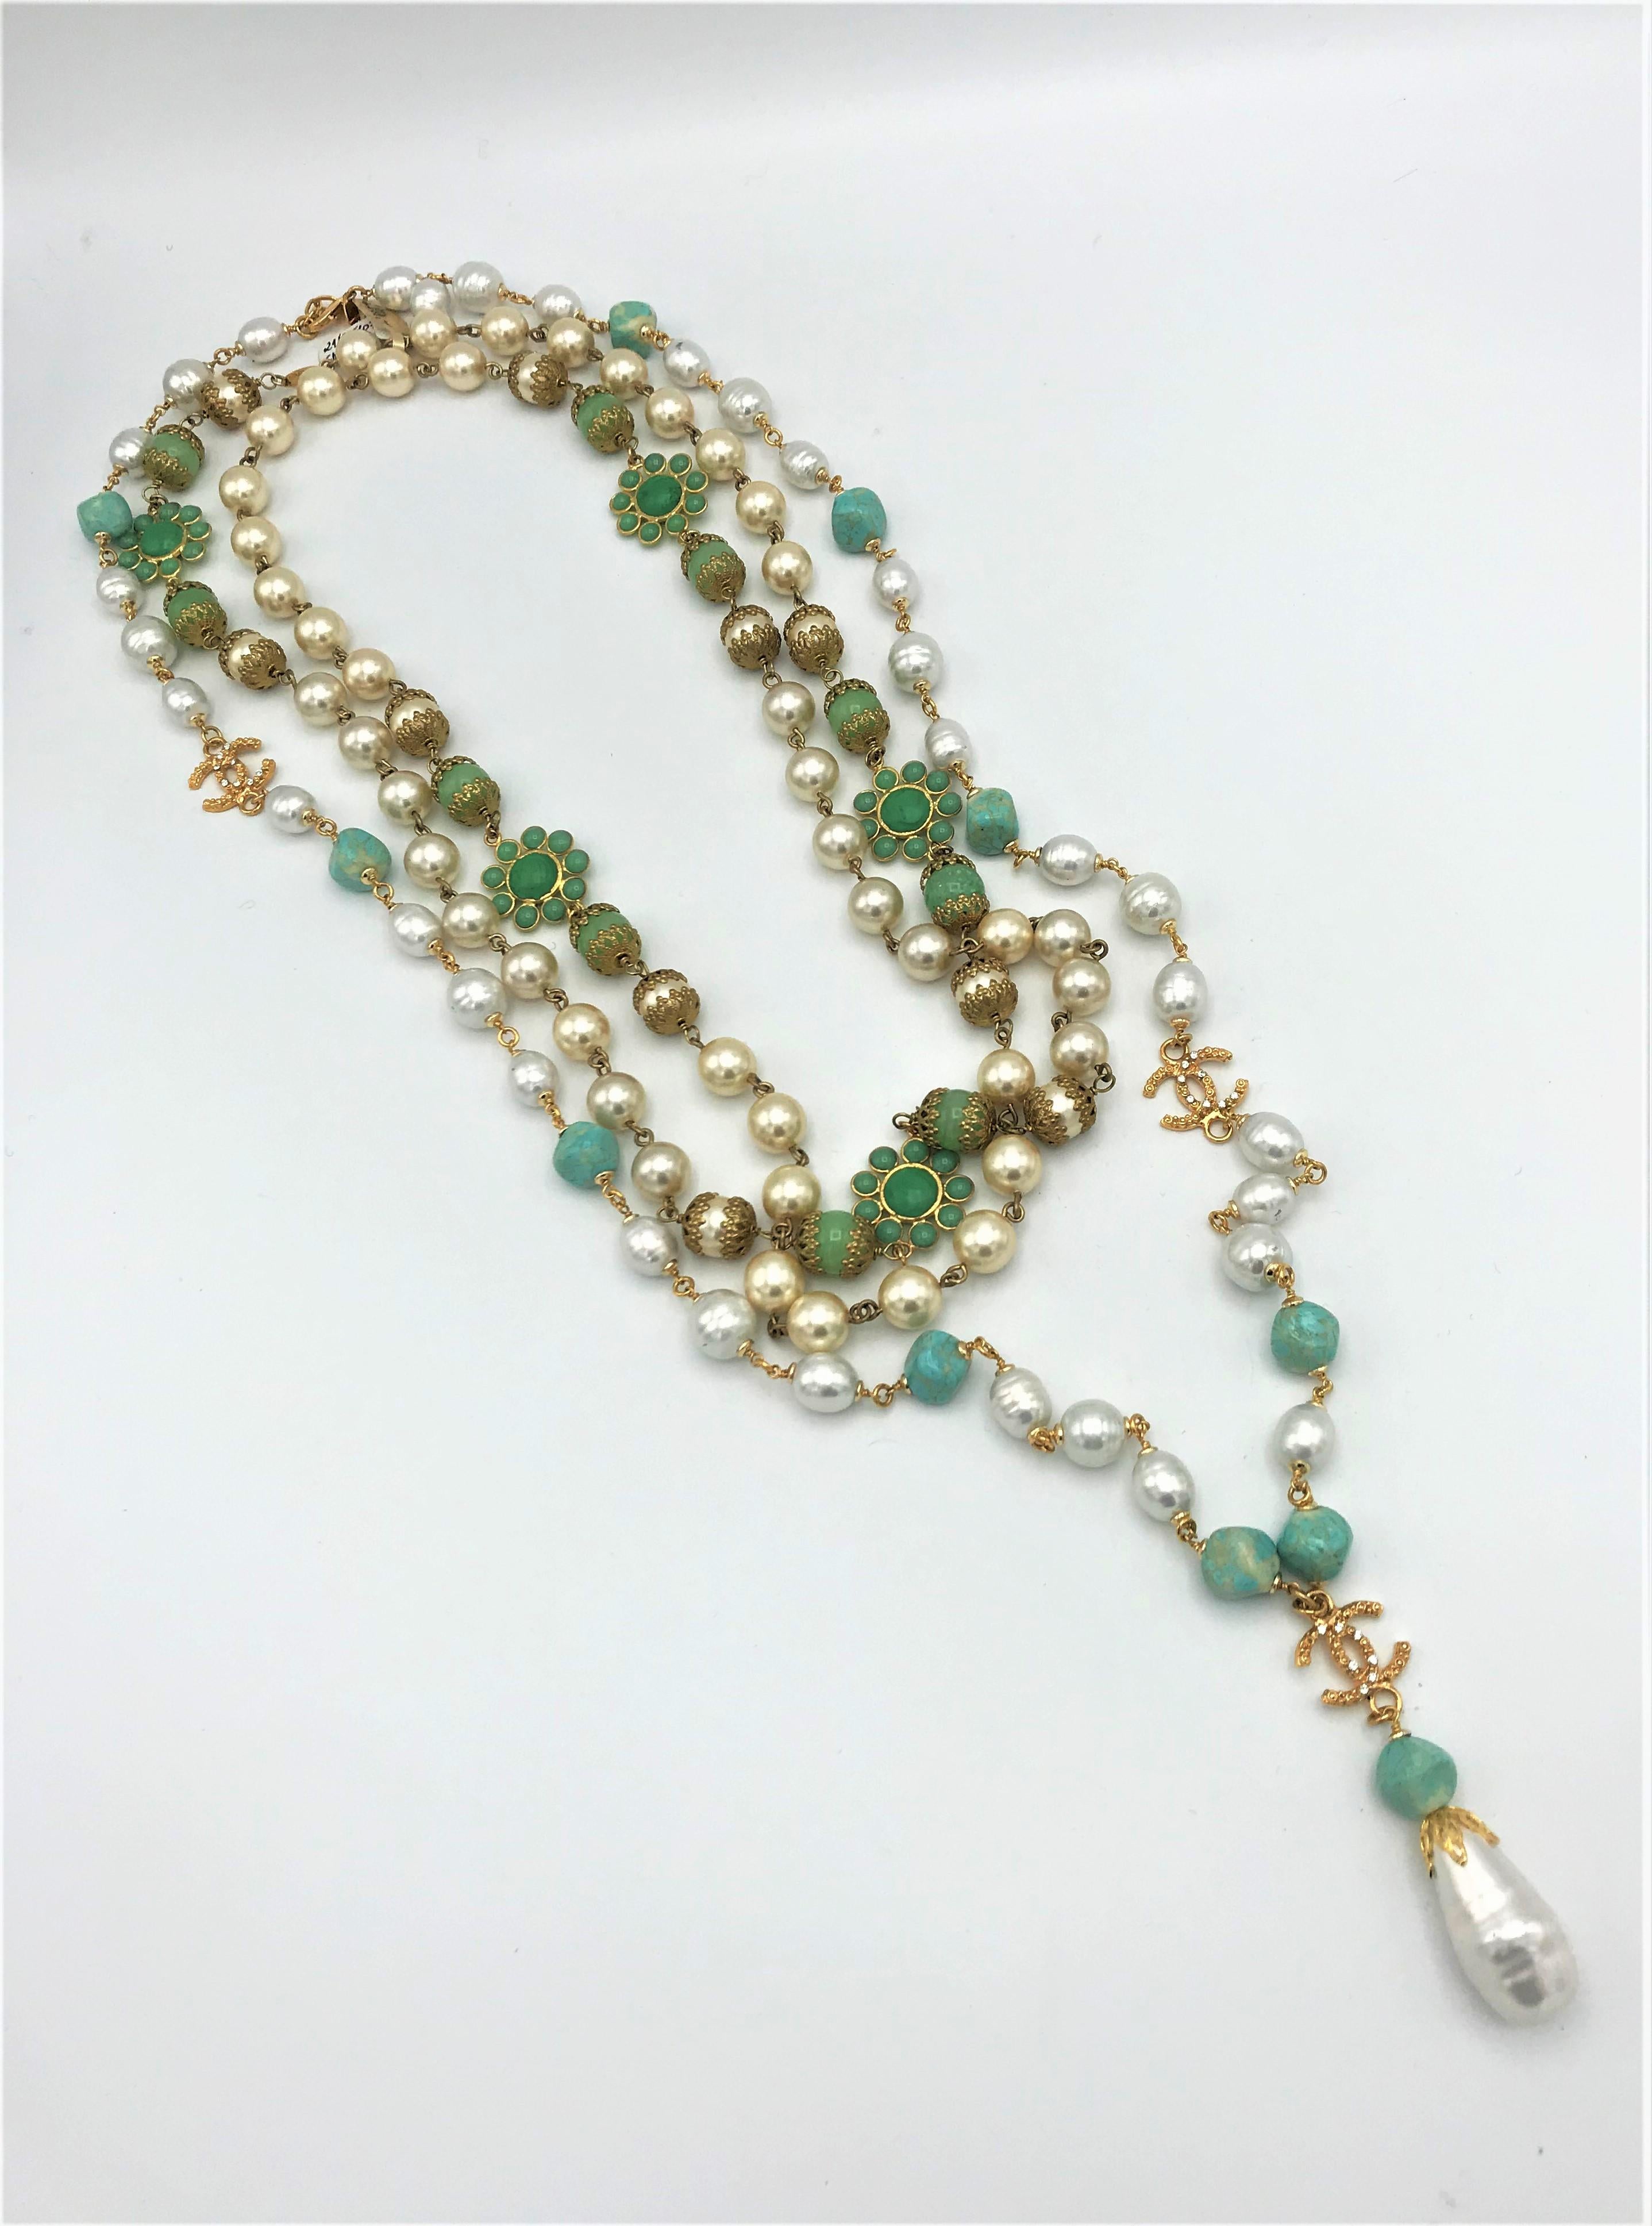 Artisan Chanel necklace with faux pearls and jade Gripoix flowers and balls sign. 1991 